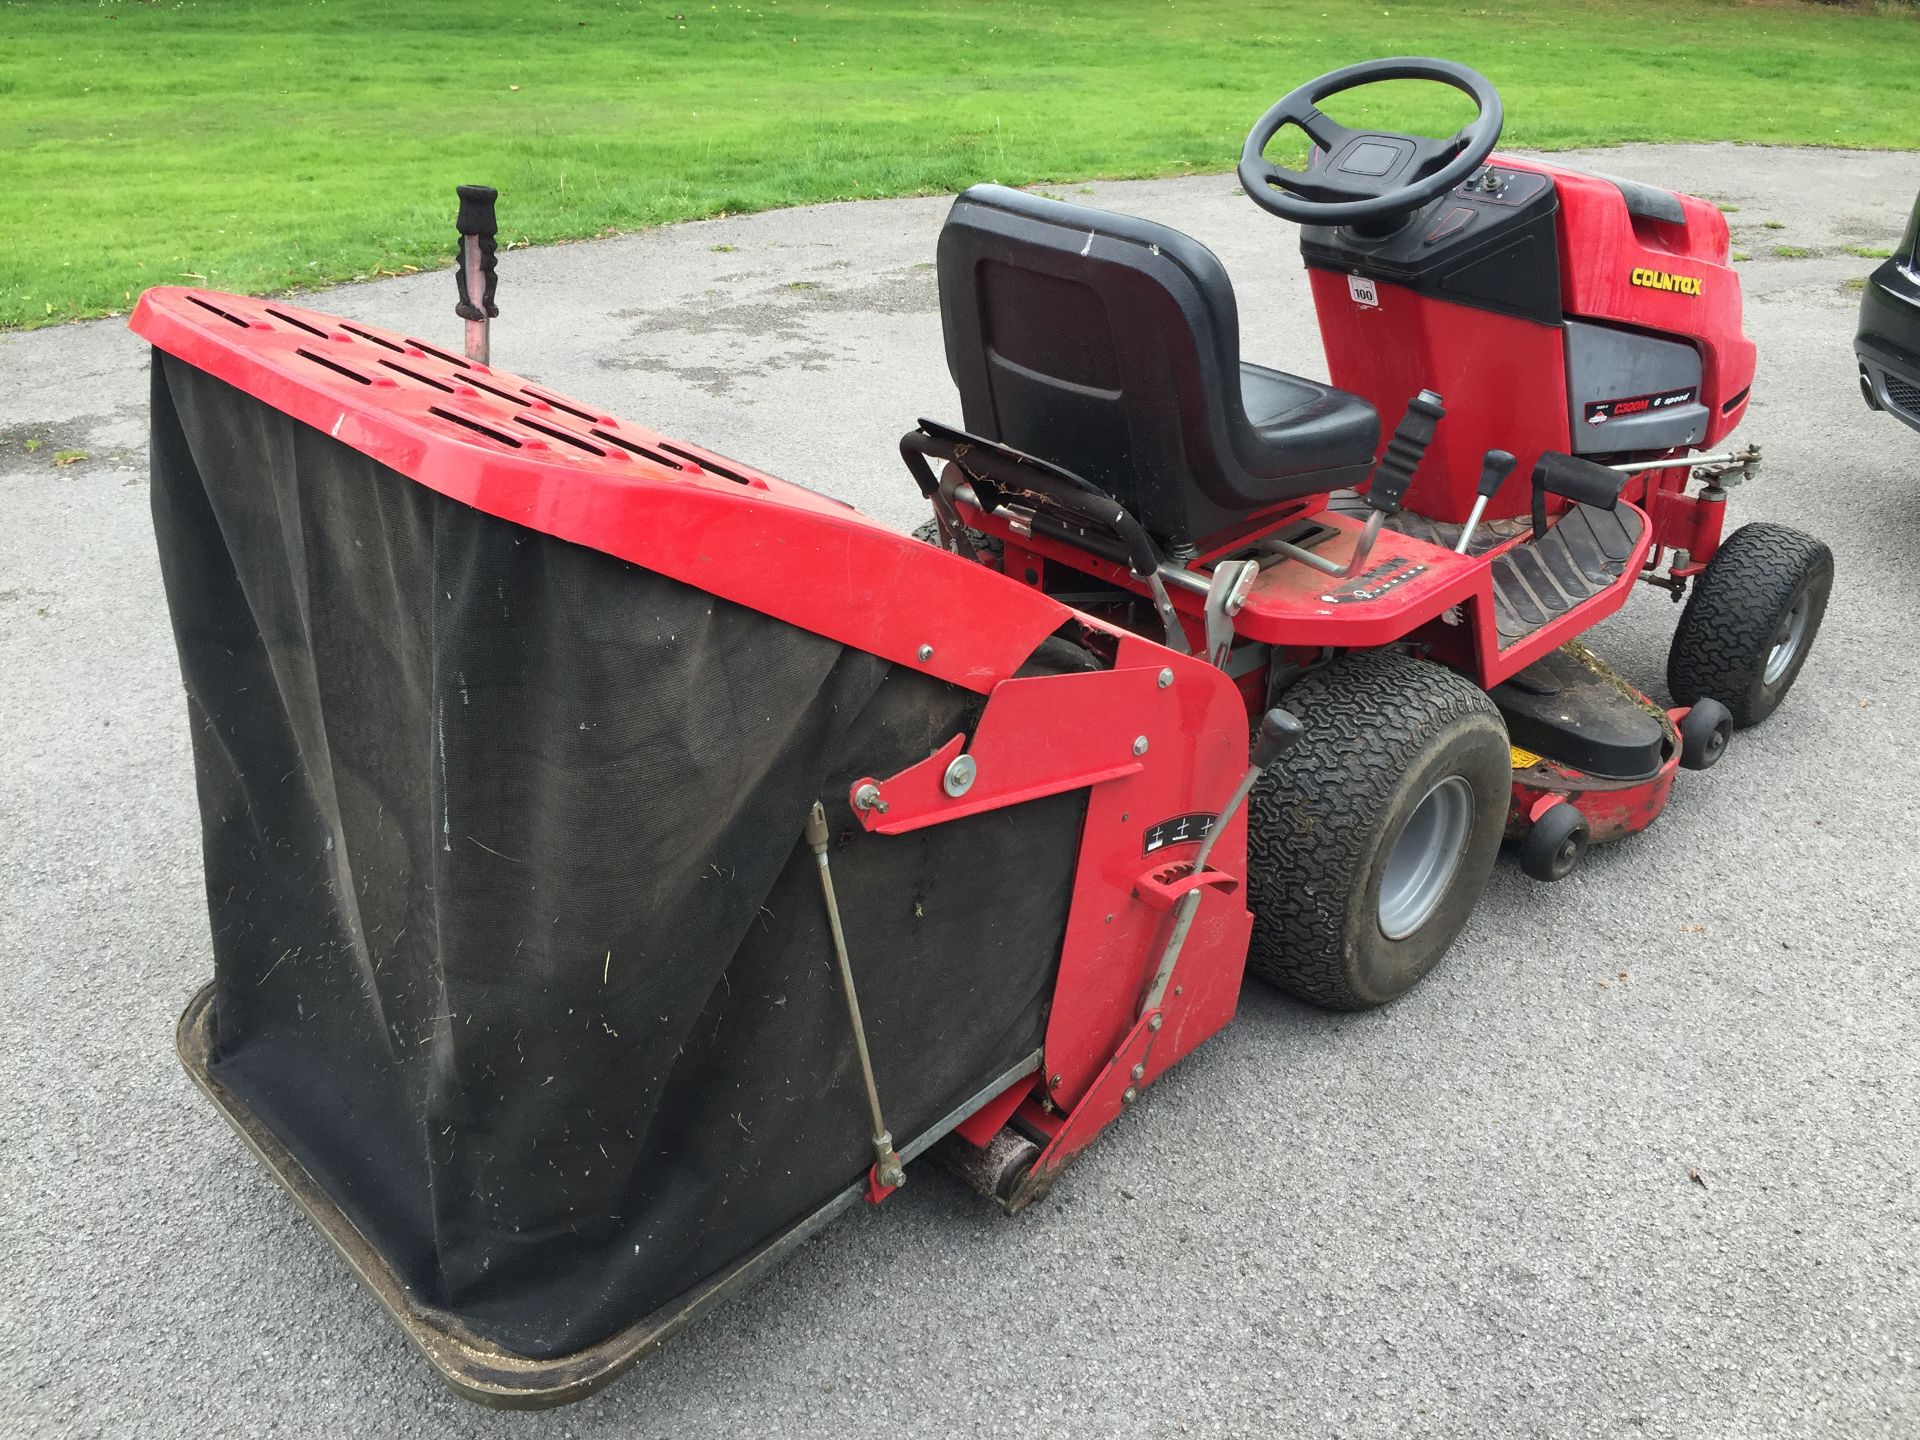 COUNTAX RIDE-ON MOWER C330M IN GOOD WROKING ORDER - Image 4 of 13